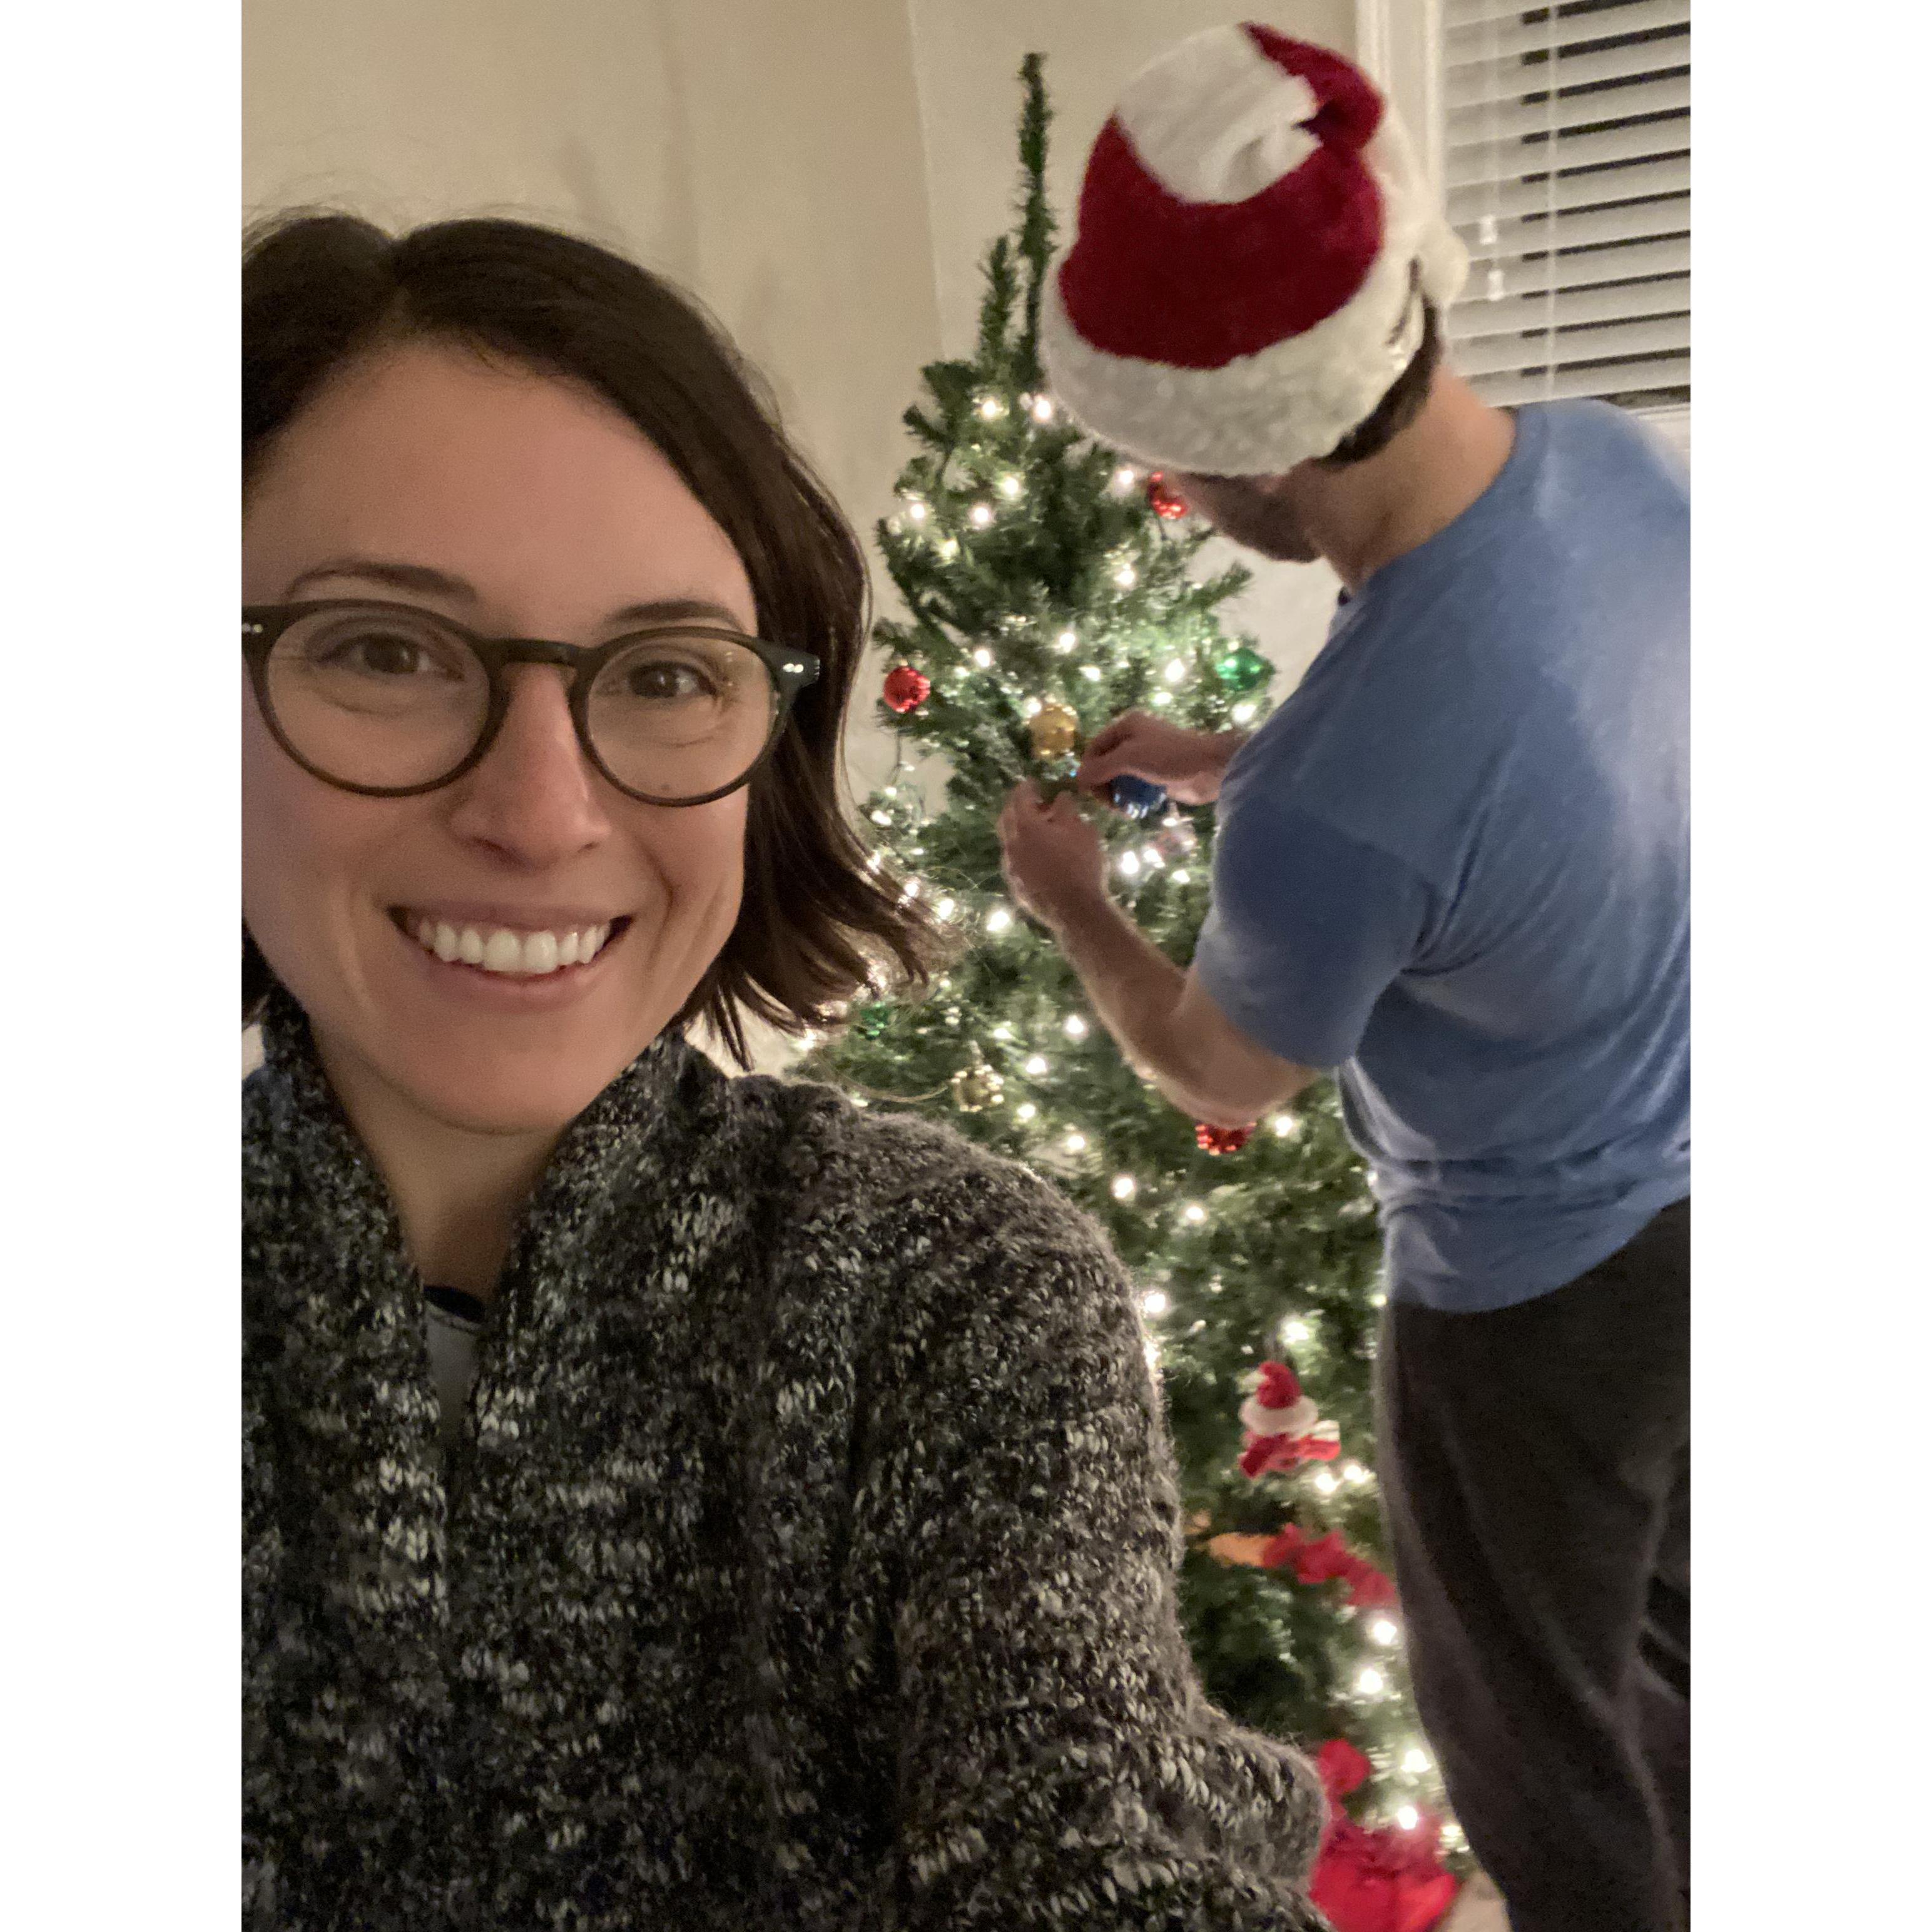 Our first Christmas living together in our Providence hooome